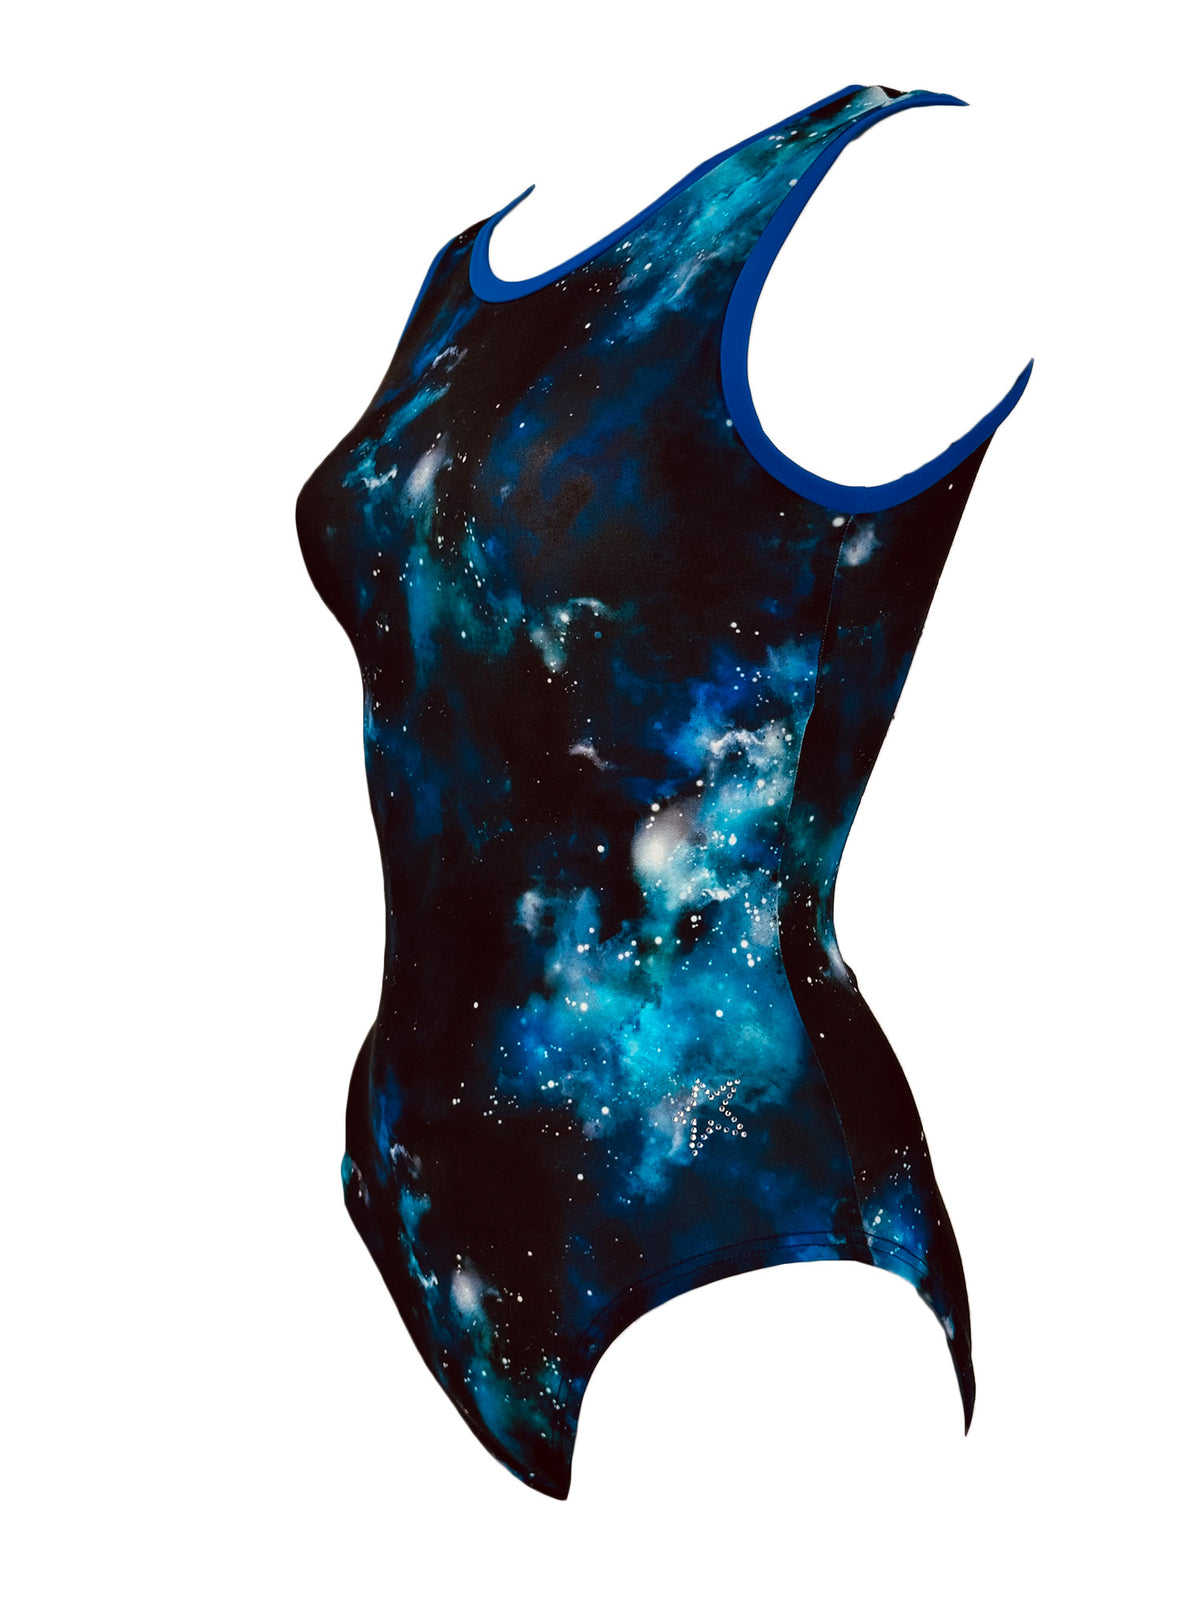 Side view image of the Galaxy Tank Style leotard